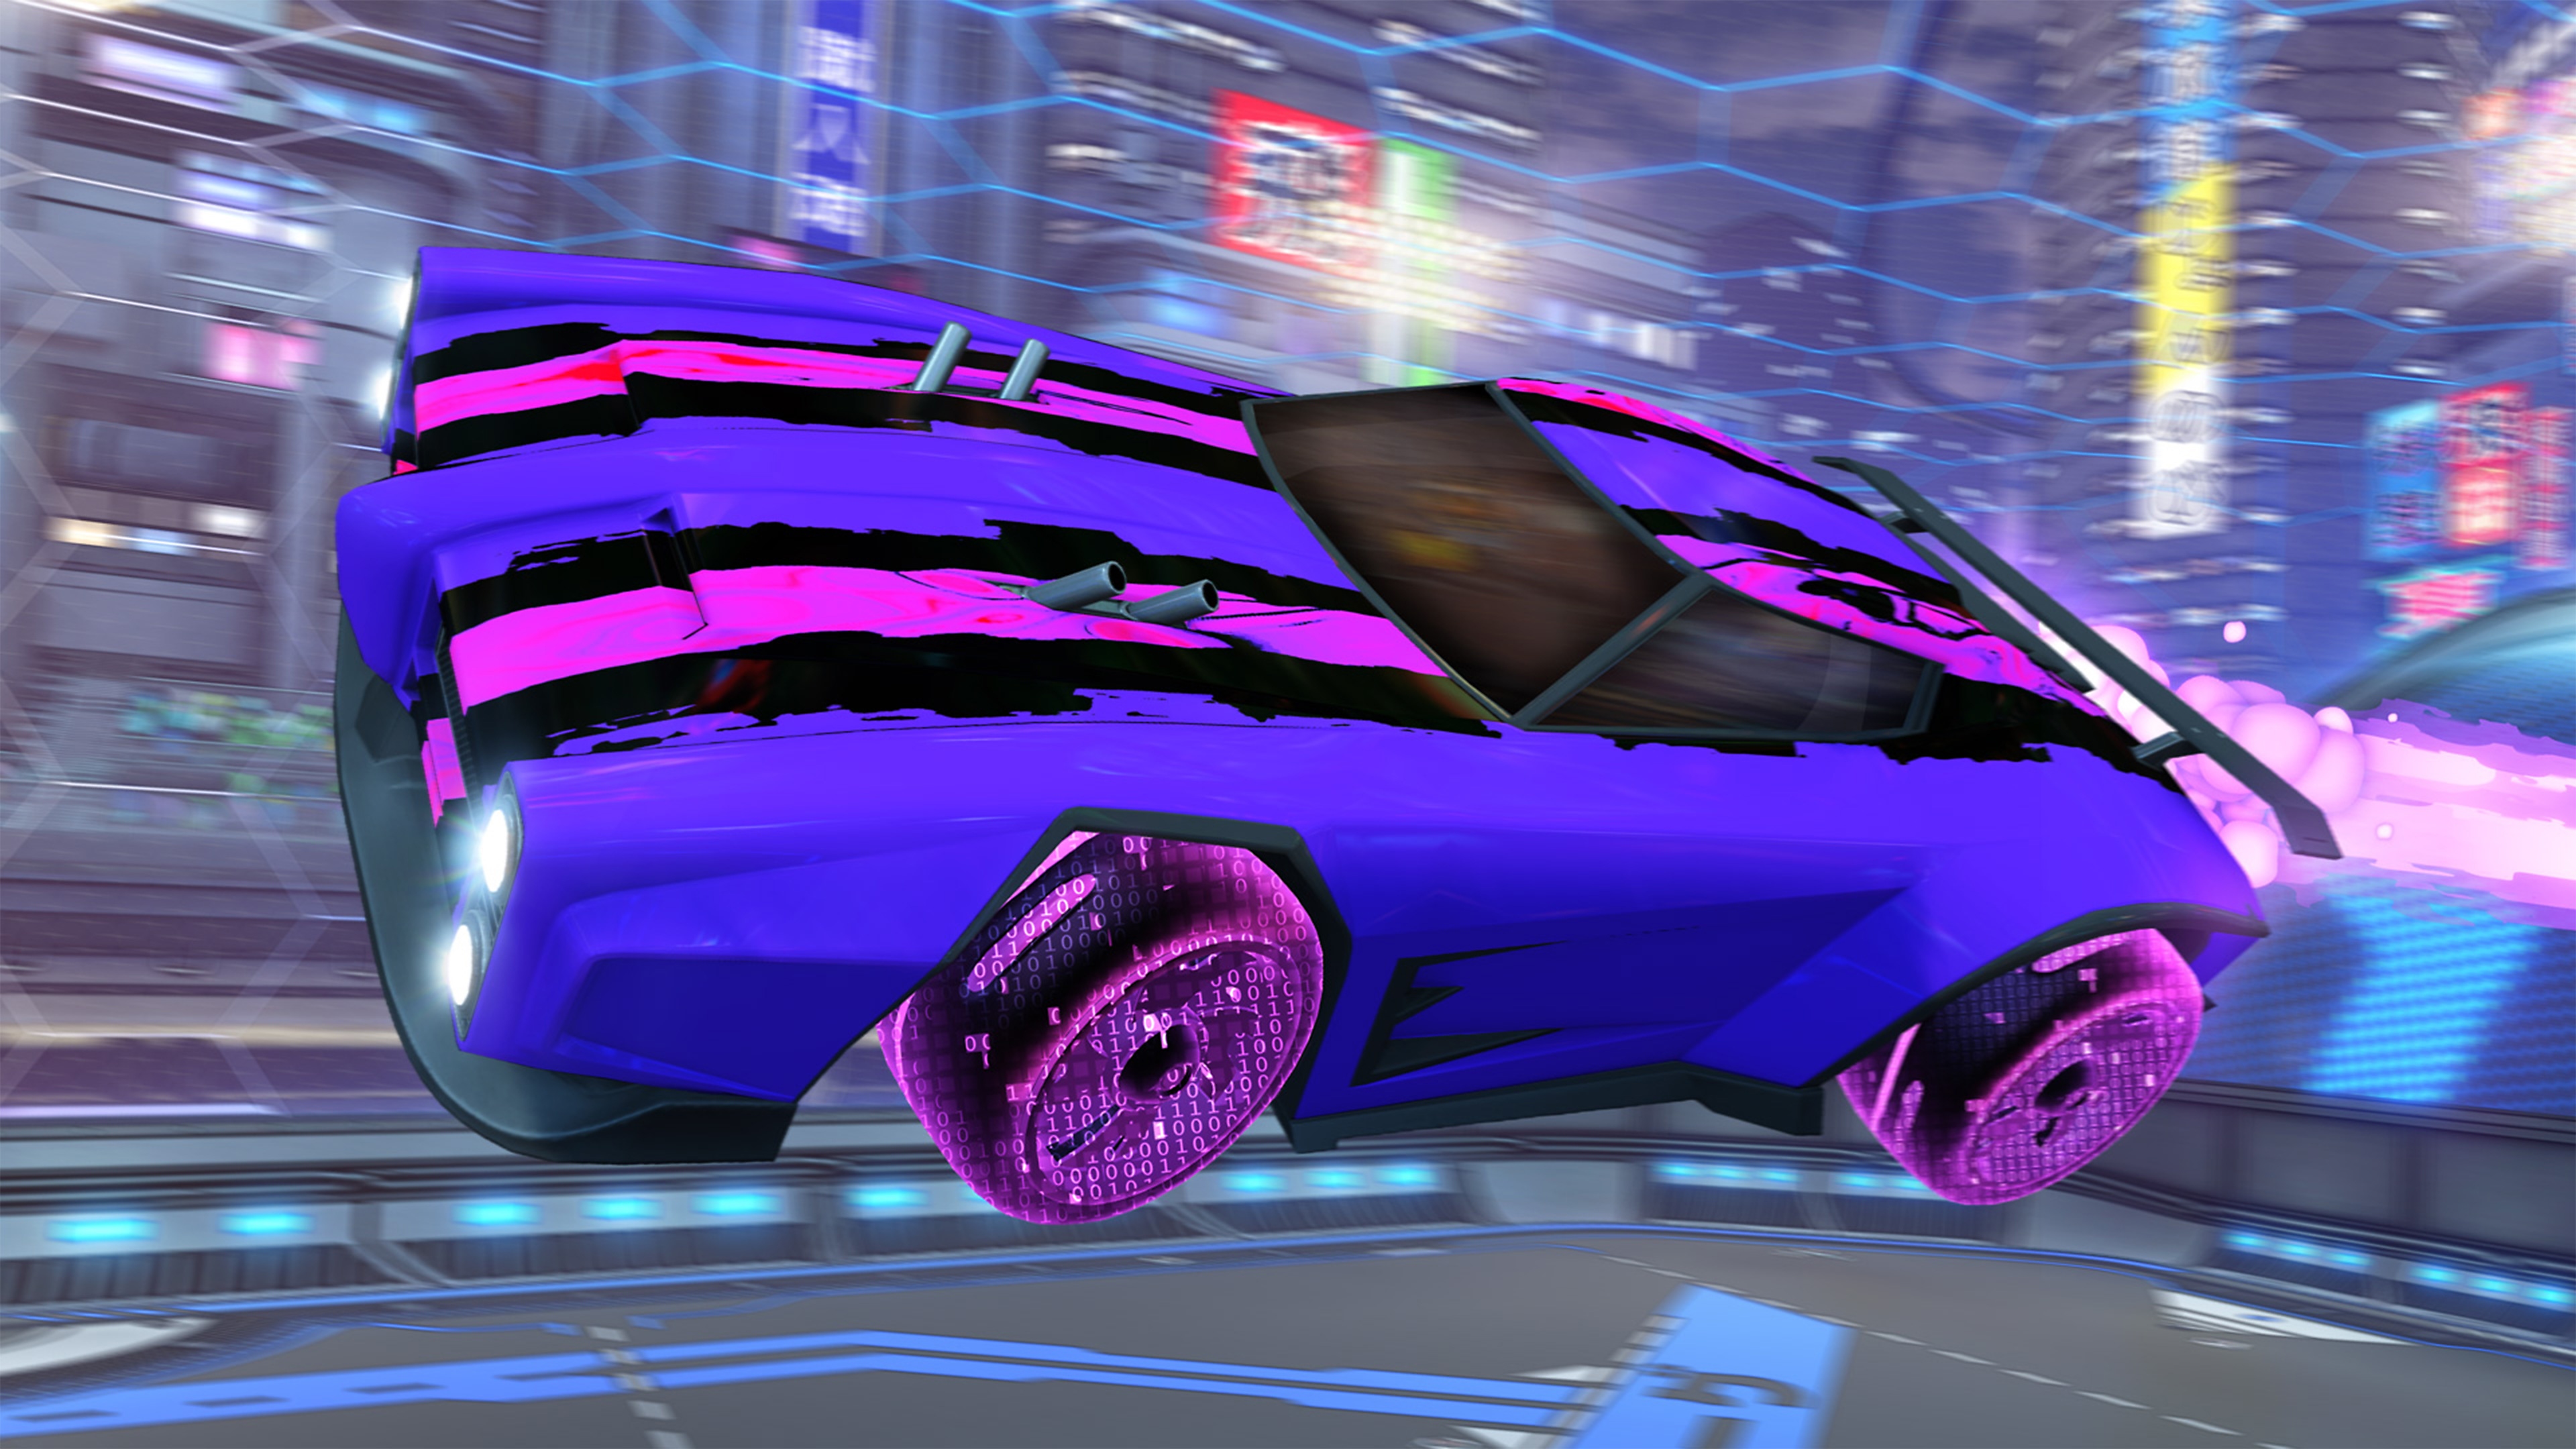 Rocket League screenshot showing purple car with pink and black racing stripes